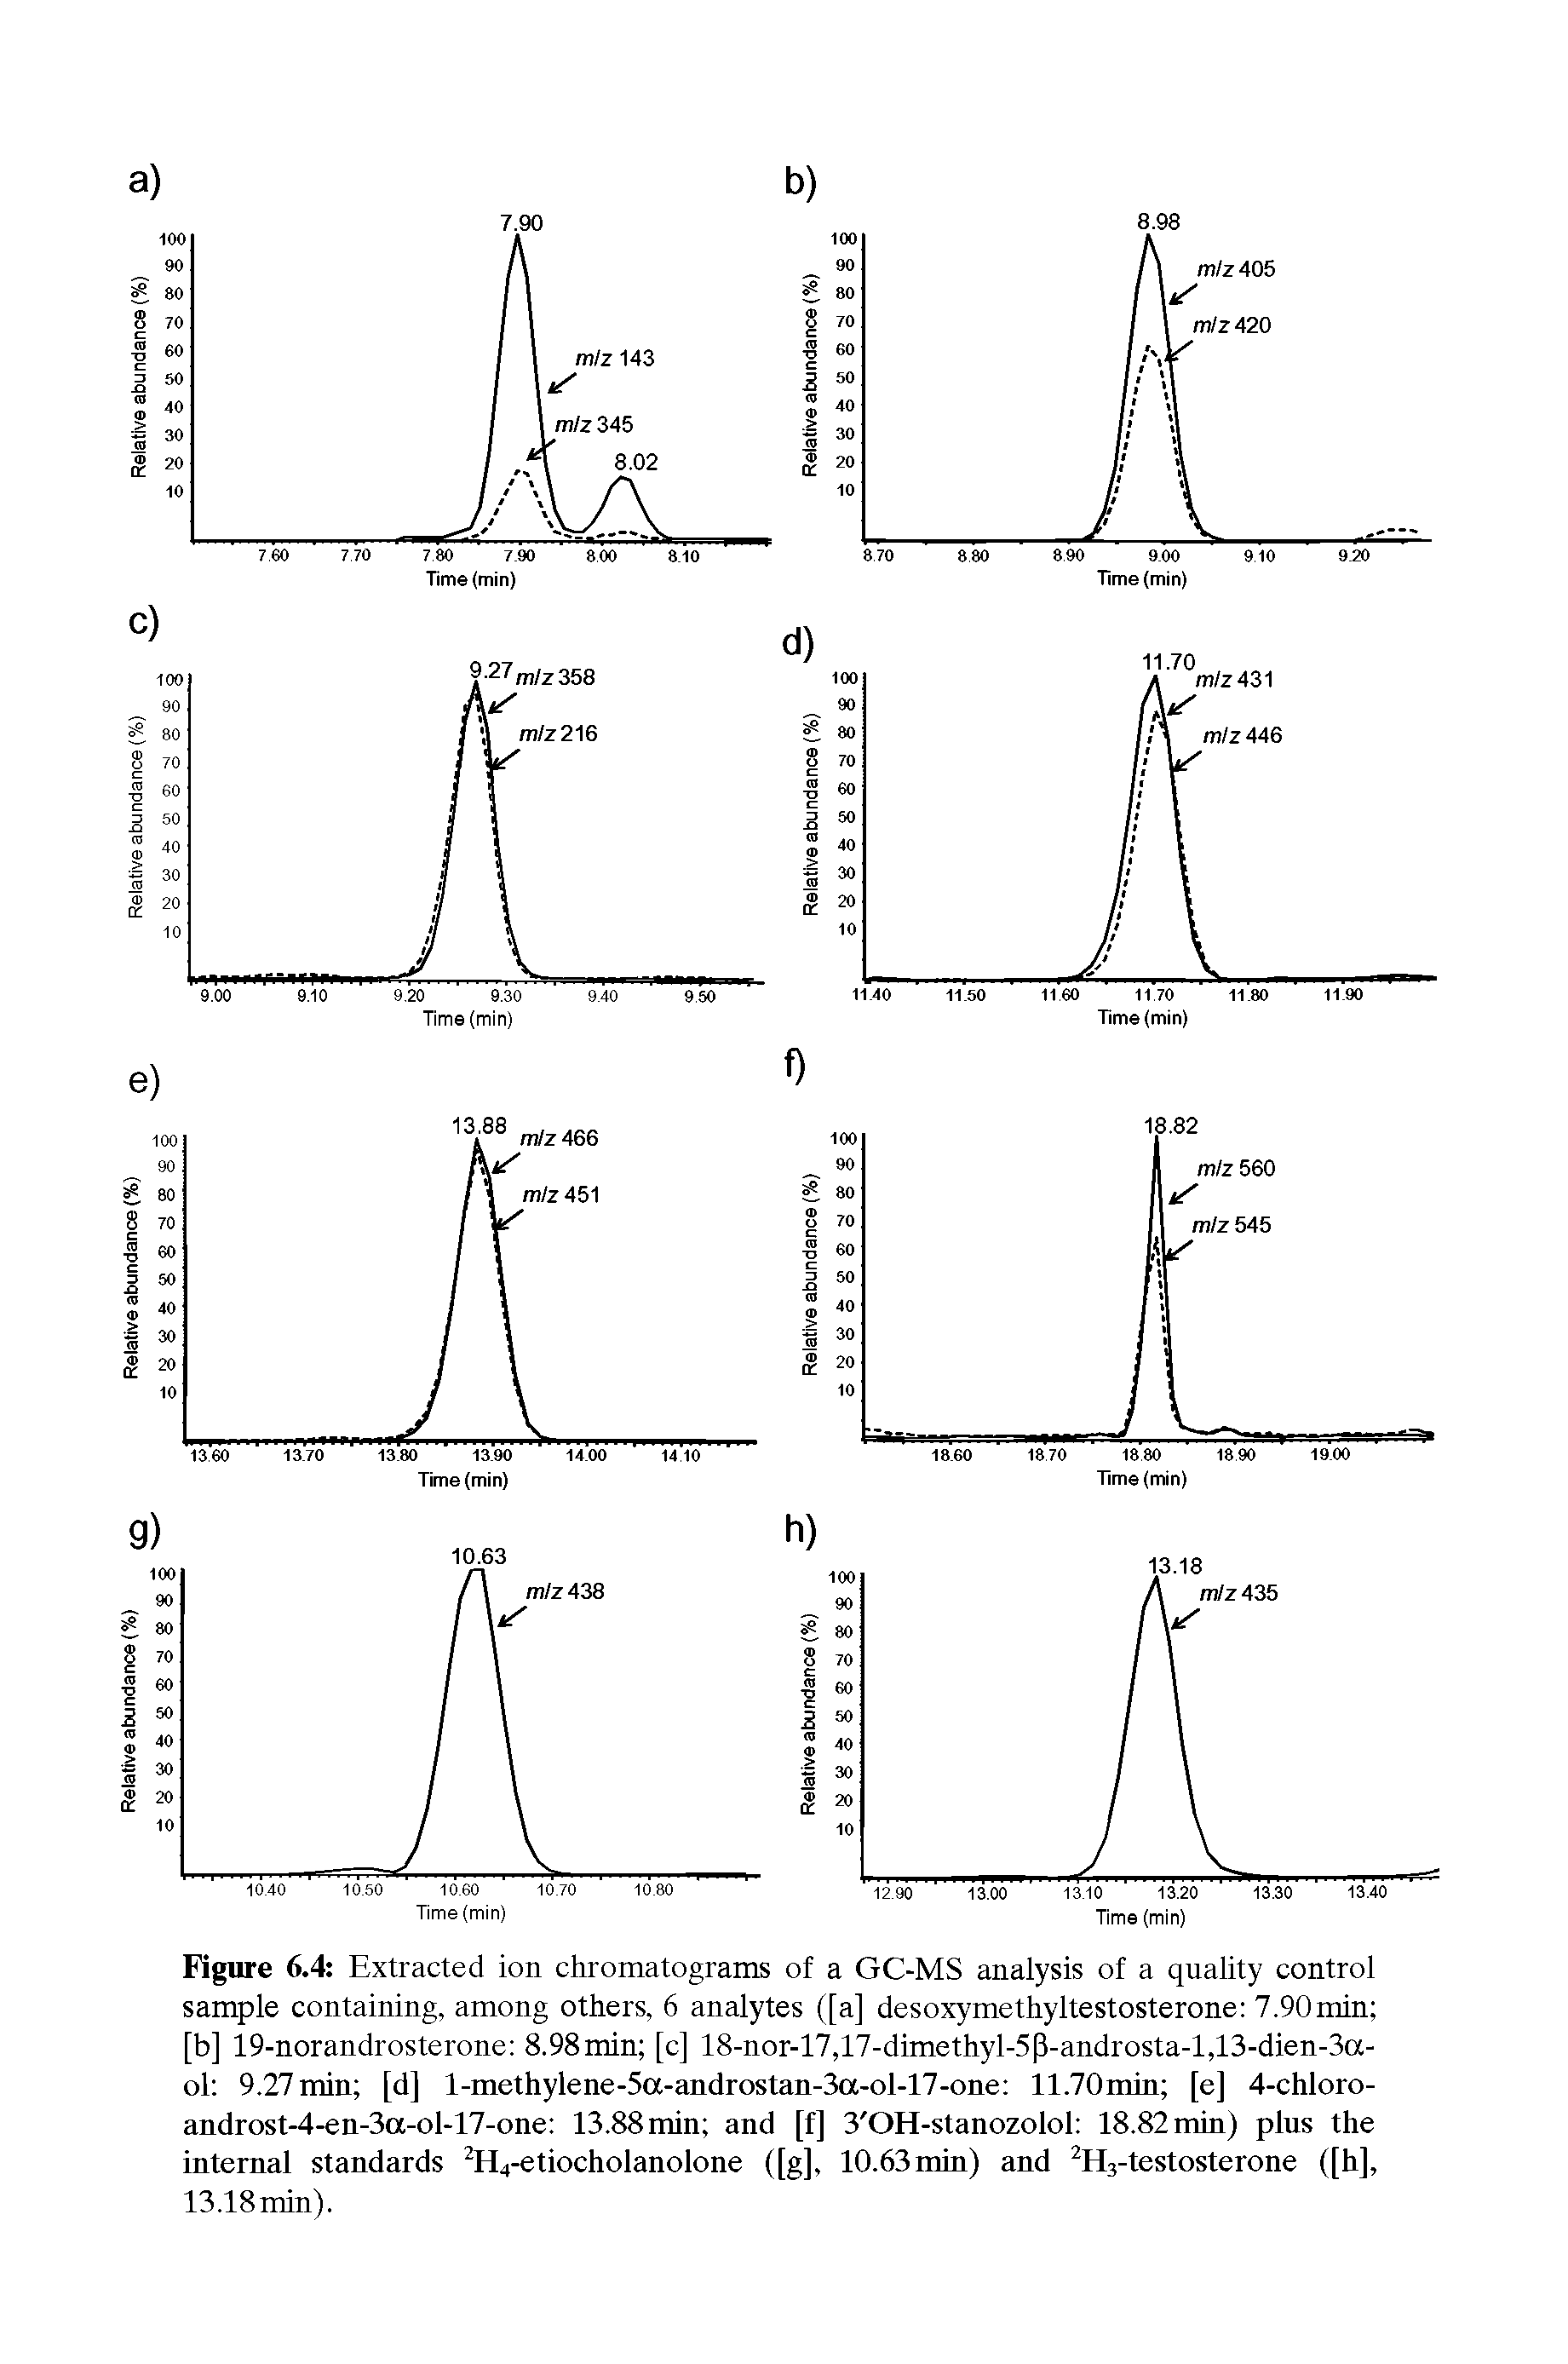 Figure 6.4 Extracted ion chromatograms of a GC-MS analysis of a qnaUty control sample containing, among others, 6 analytes ([a] desoxymethyltestosterone 7.90min [b] 19-norandrosterone 8.98 min [c] 18-nor-17,17-dimethyl-5P-androsta-l,13-dien-3a-ol 9.27min [d] l-methylene-5a-androstan-3a-ol-17-one 11.70min [e] 4-chloro-androst-4-en-3a-ol-17-one 13.88 min and [f] 3 OH-stanozolol 18.82 mm) plus the internal standards H4-etiocholanolone ([g], 10.63min) and Hs-testosterone ([h], 13.18min).